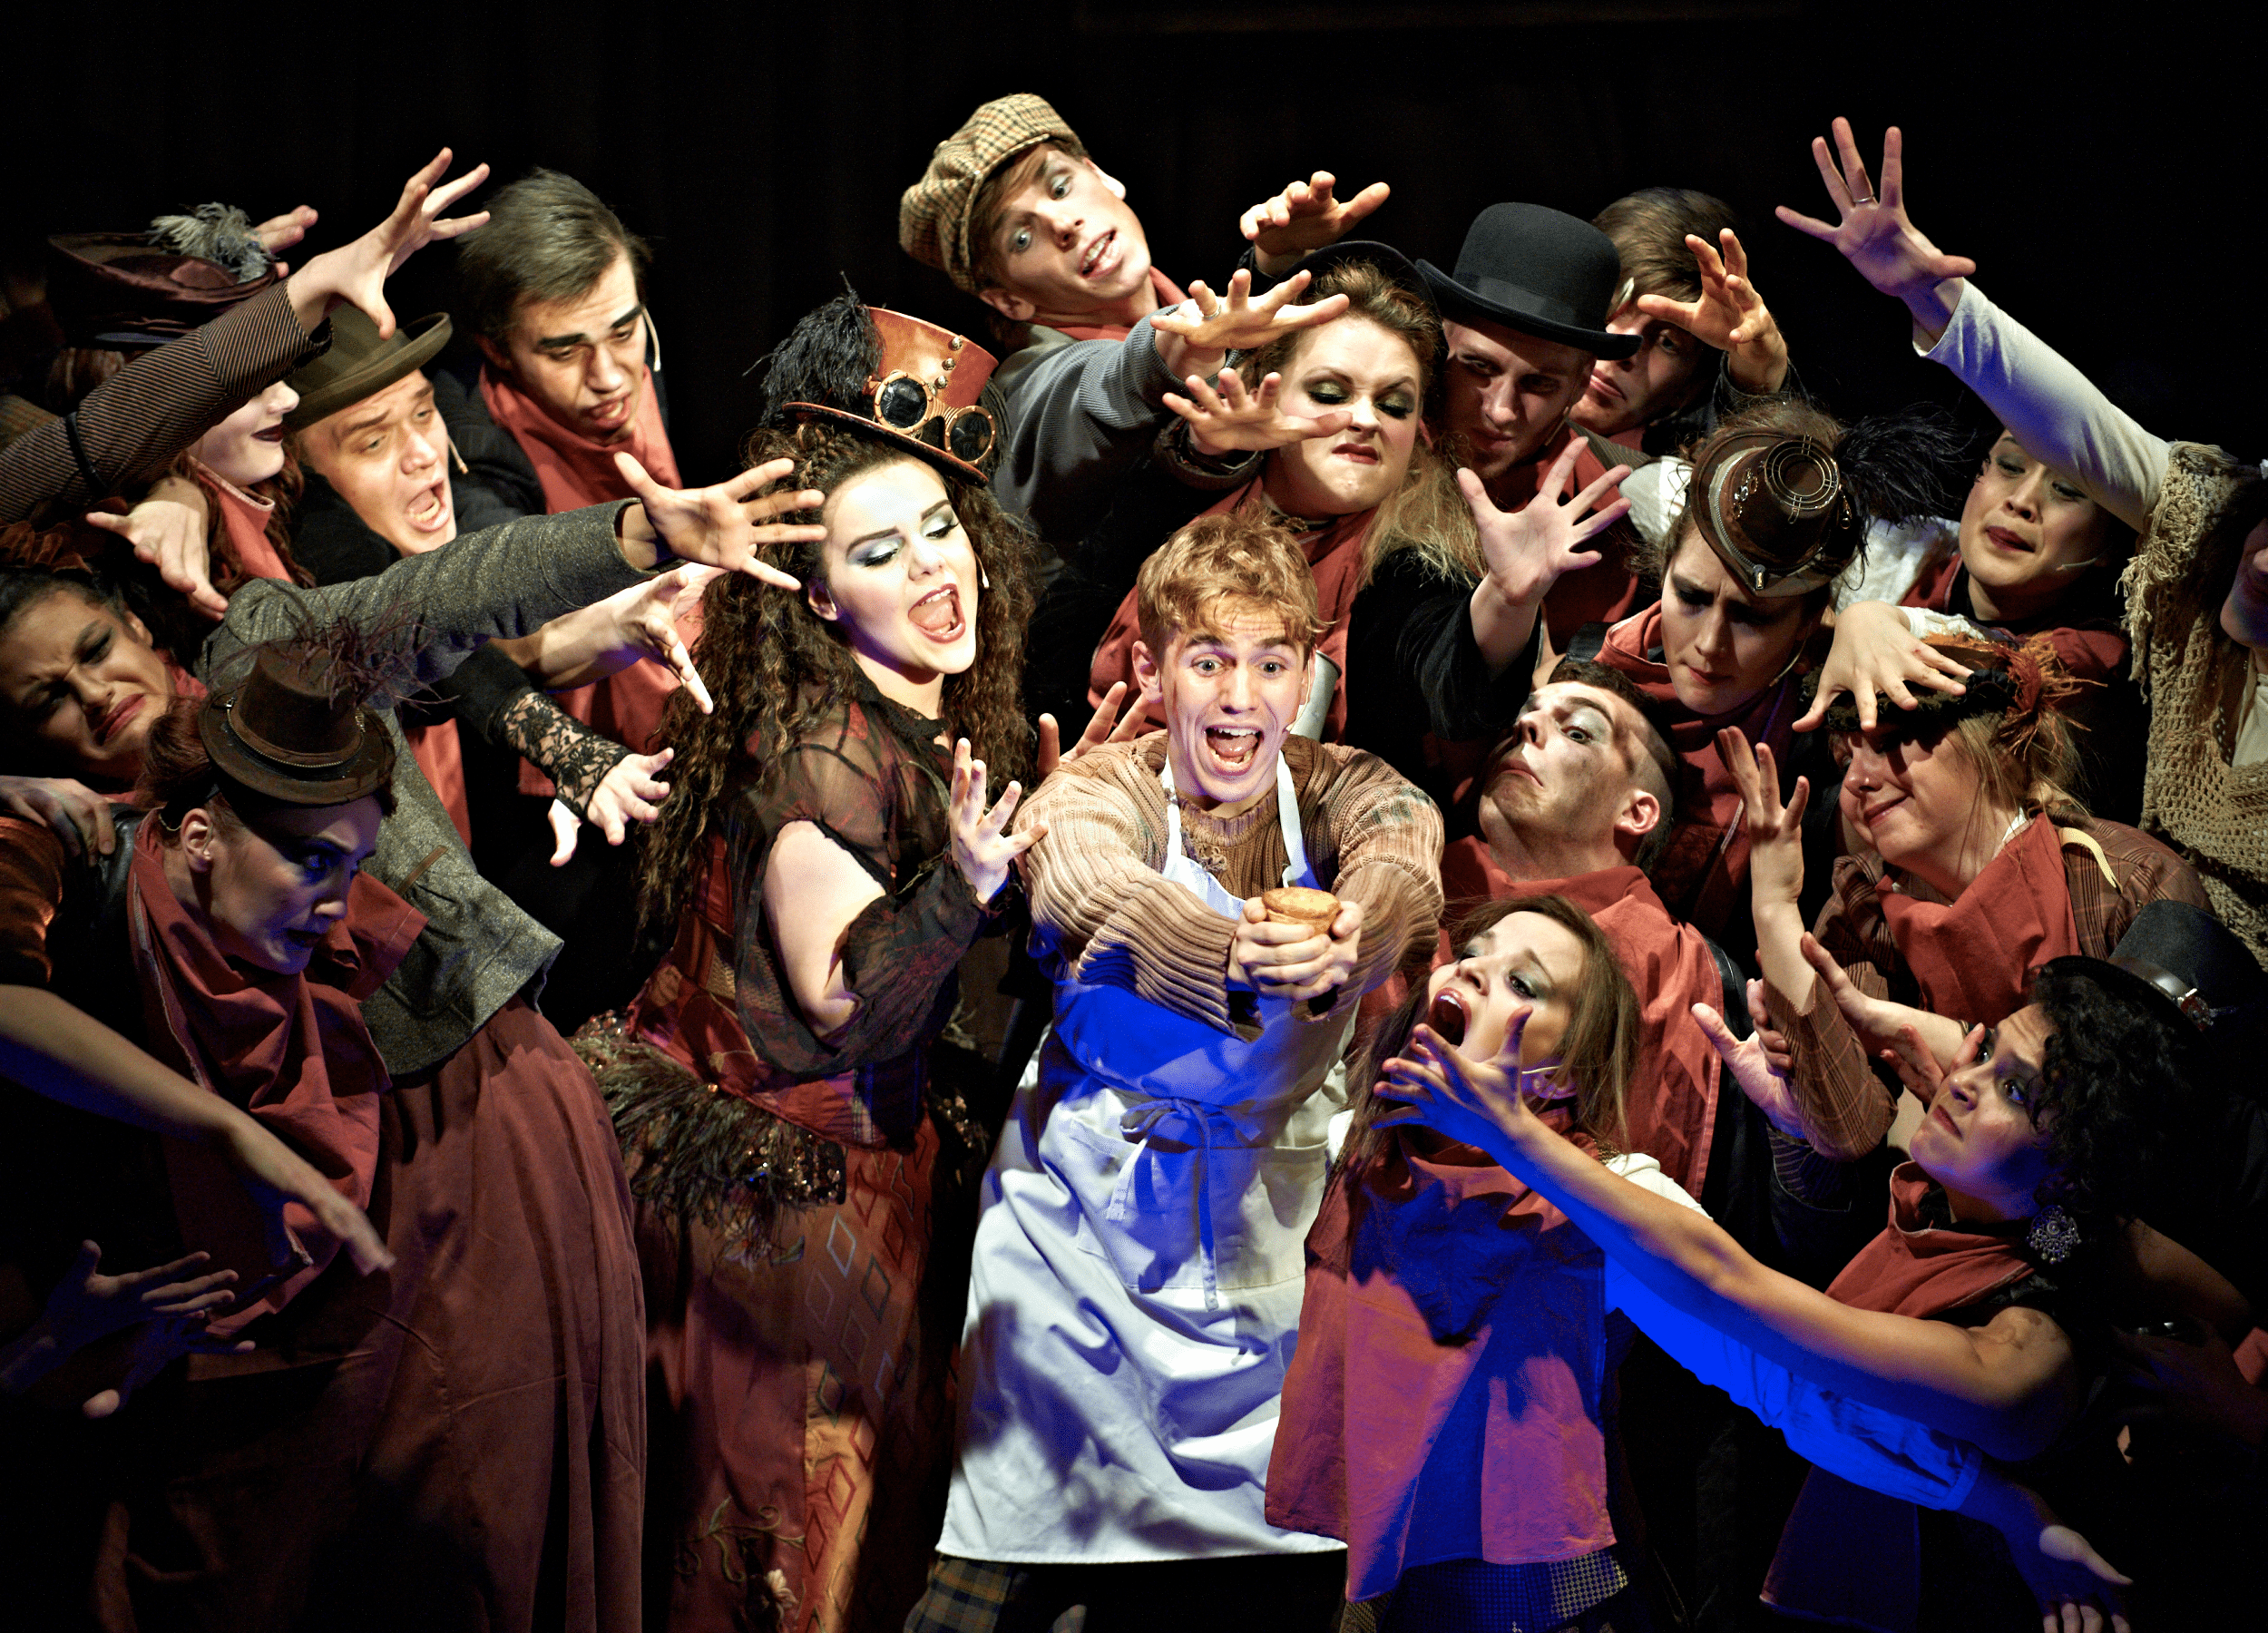 A group of Performing Arts students in a theatrical production